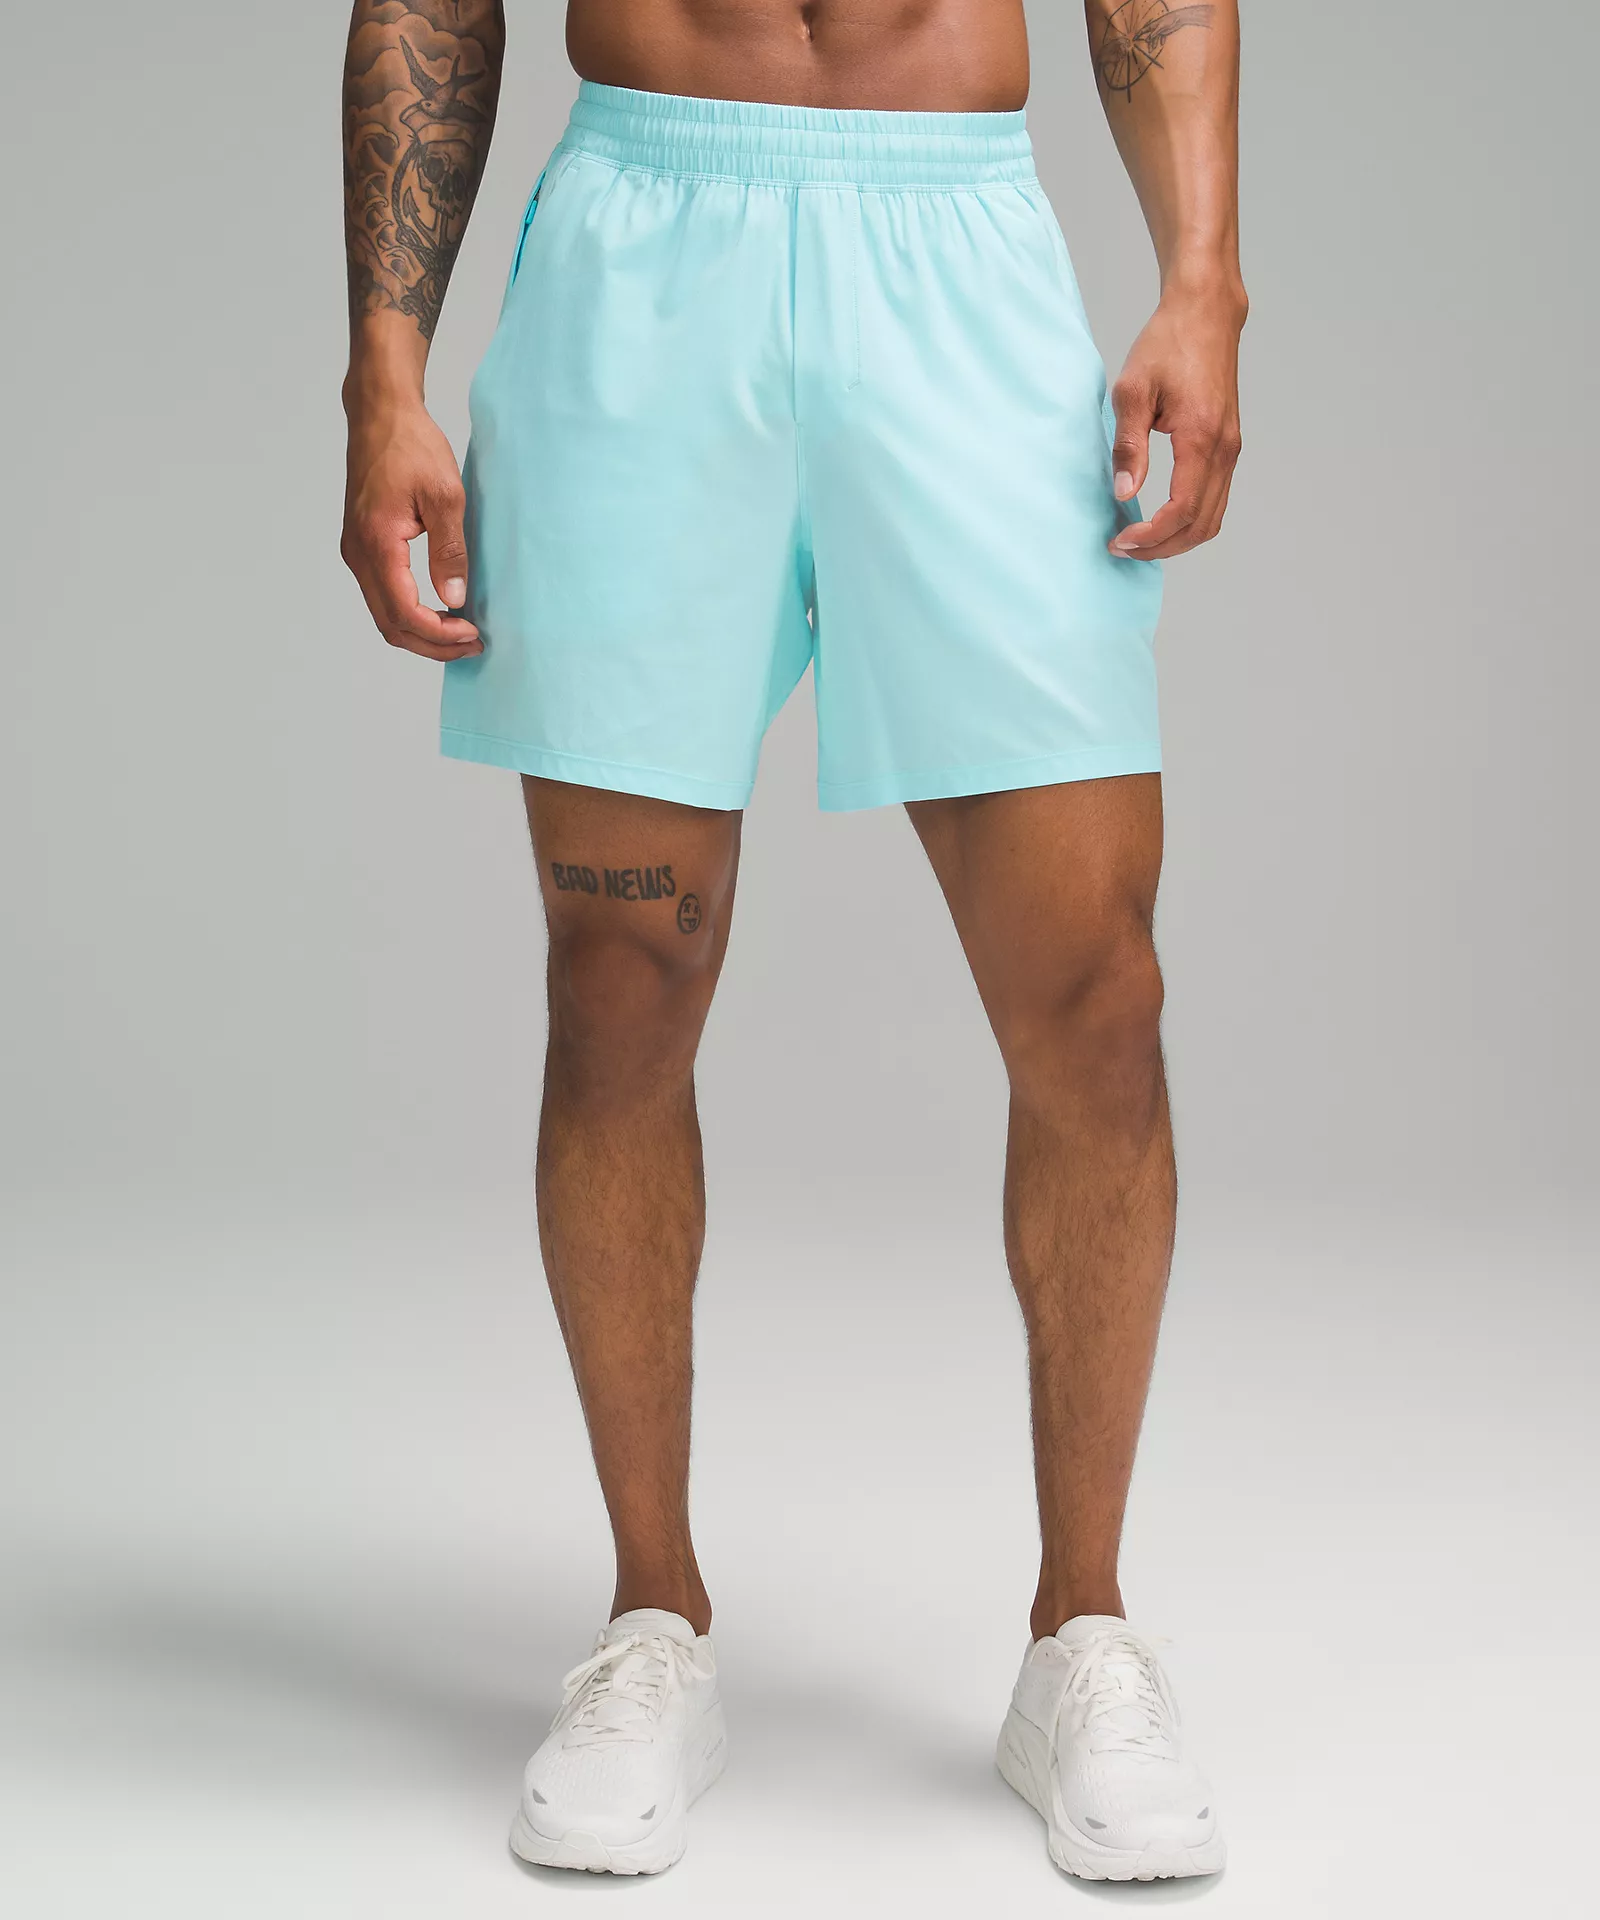 Trying on the powder blue hotty hots from lululemon and testing